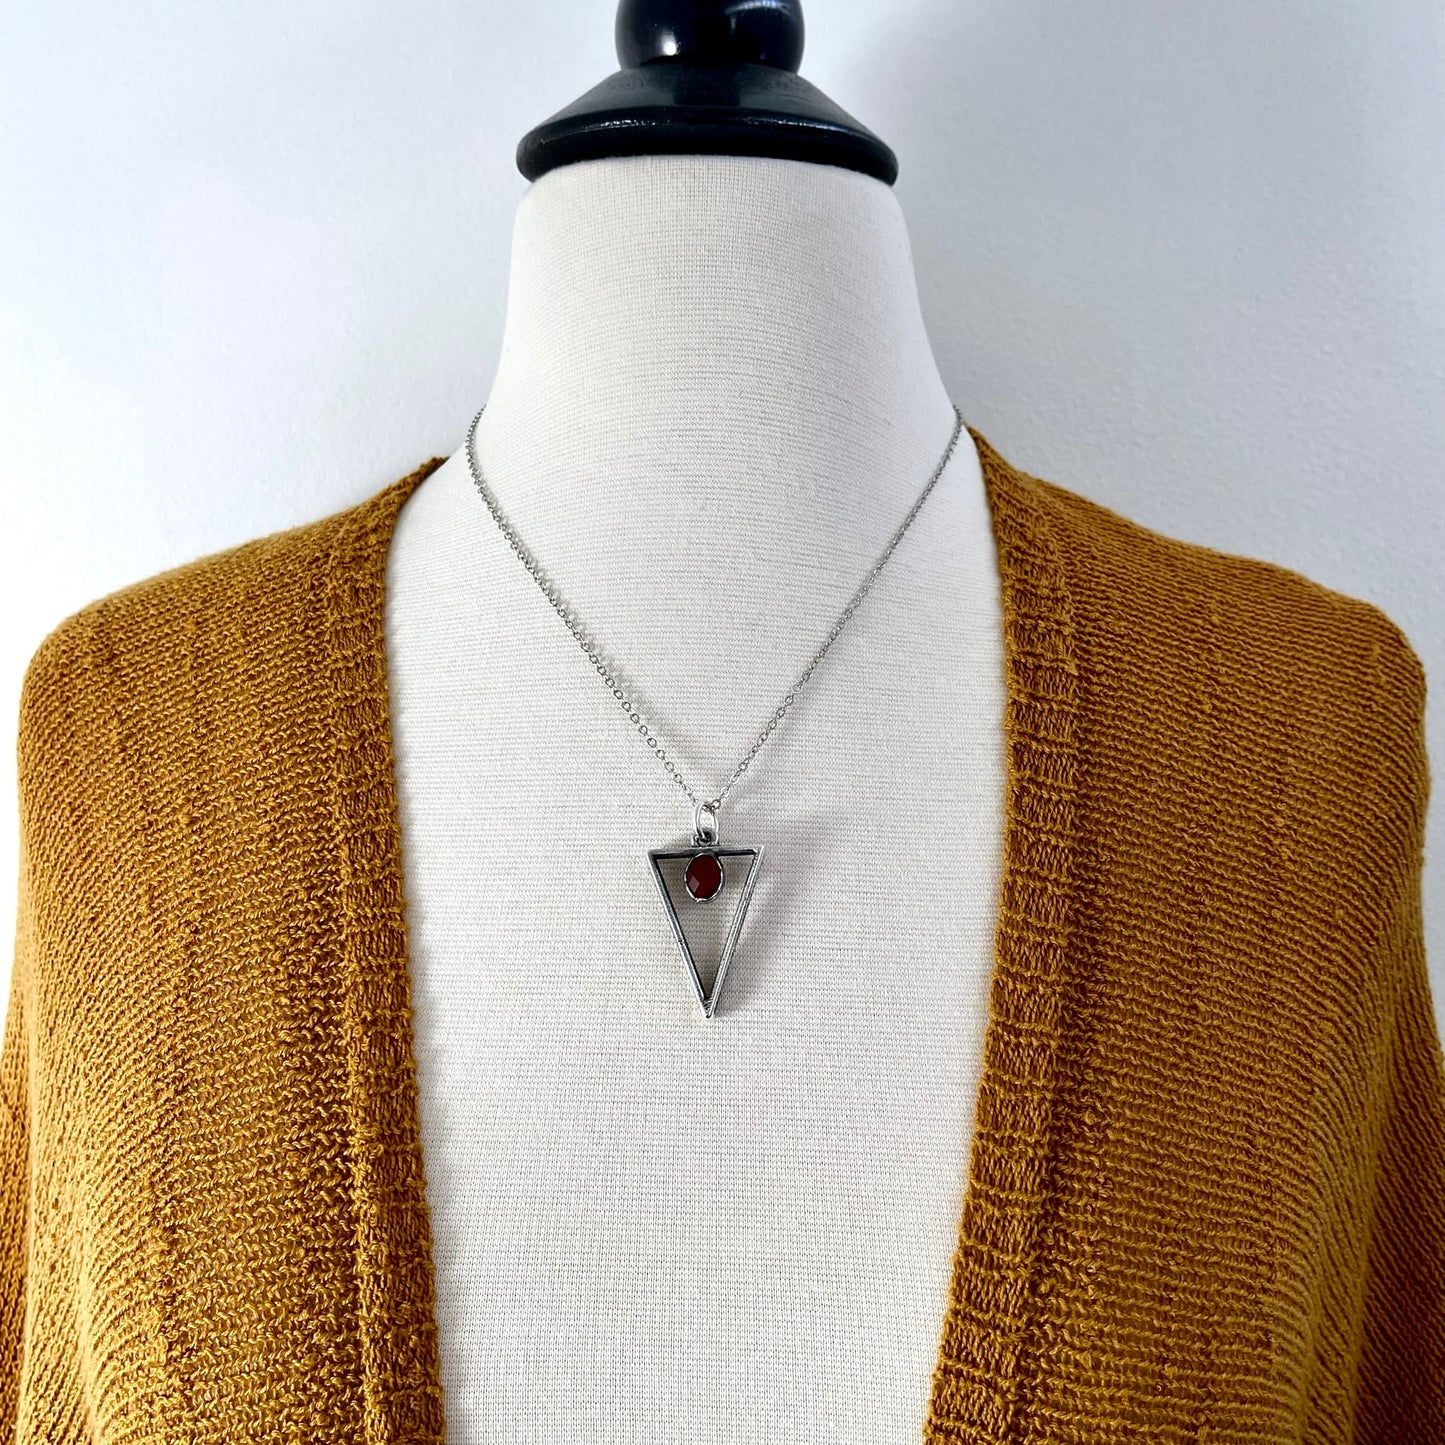 Triangular Carnelian Crystal Necklace Pendant in Fine Silver / Foxlark Collection - One of a Kind - Foxlark Crystal Jewelry